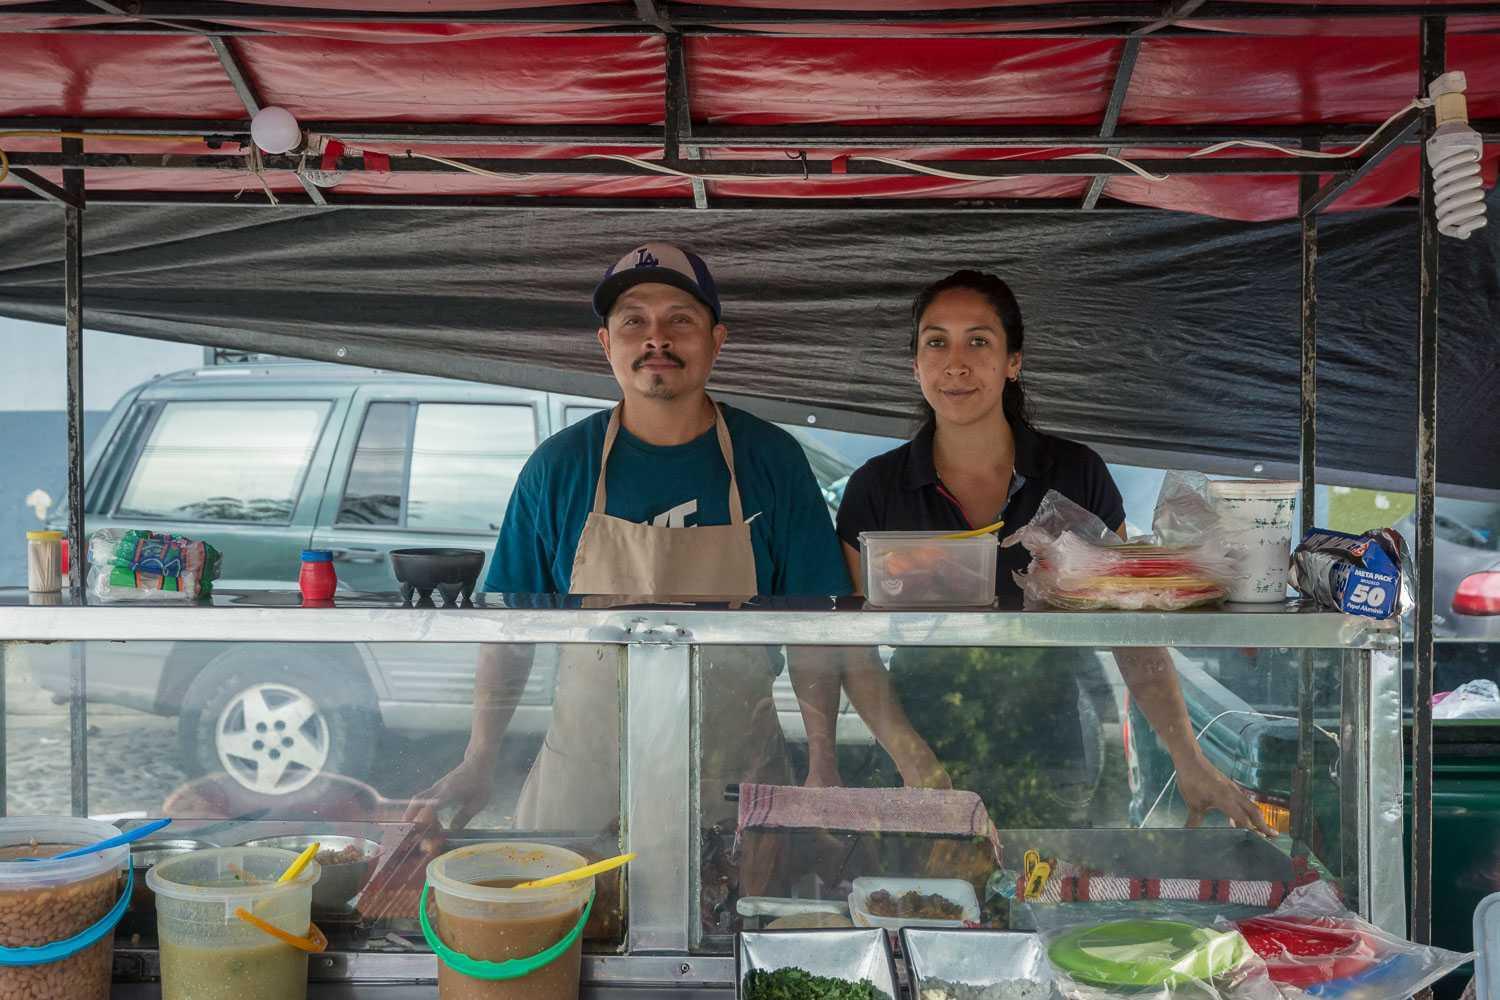 Owners Juan José Gamboa and Angy Saucedo serve tacos on the Ajijic plaza six nights a week from 7:00 to 11:30 p.m.